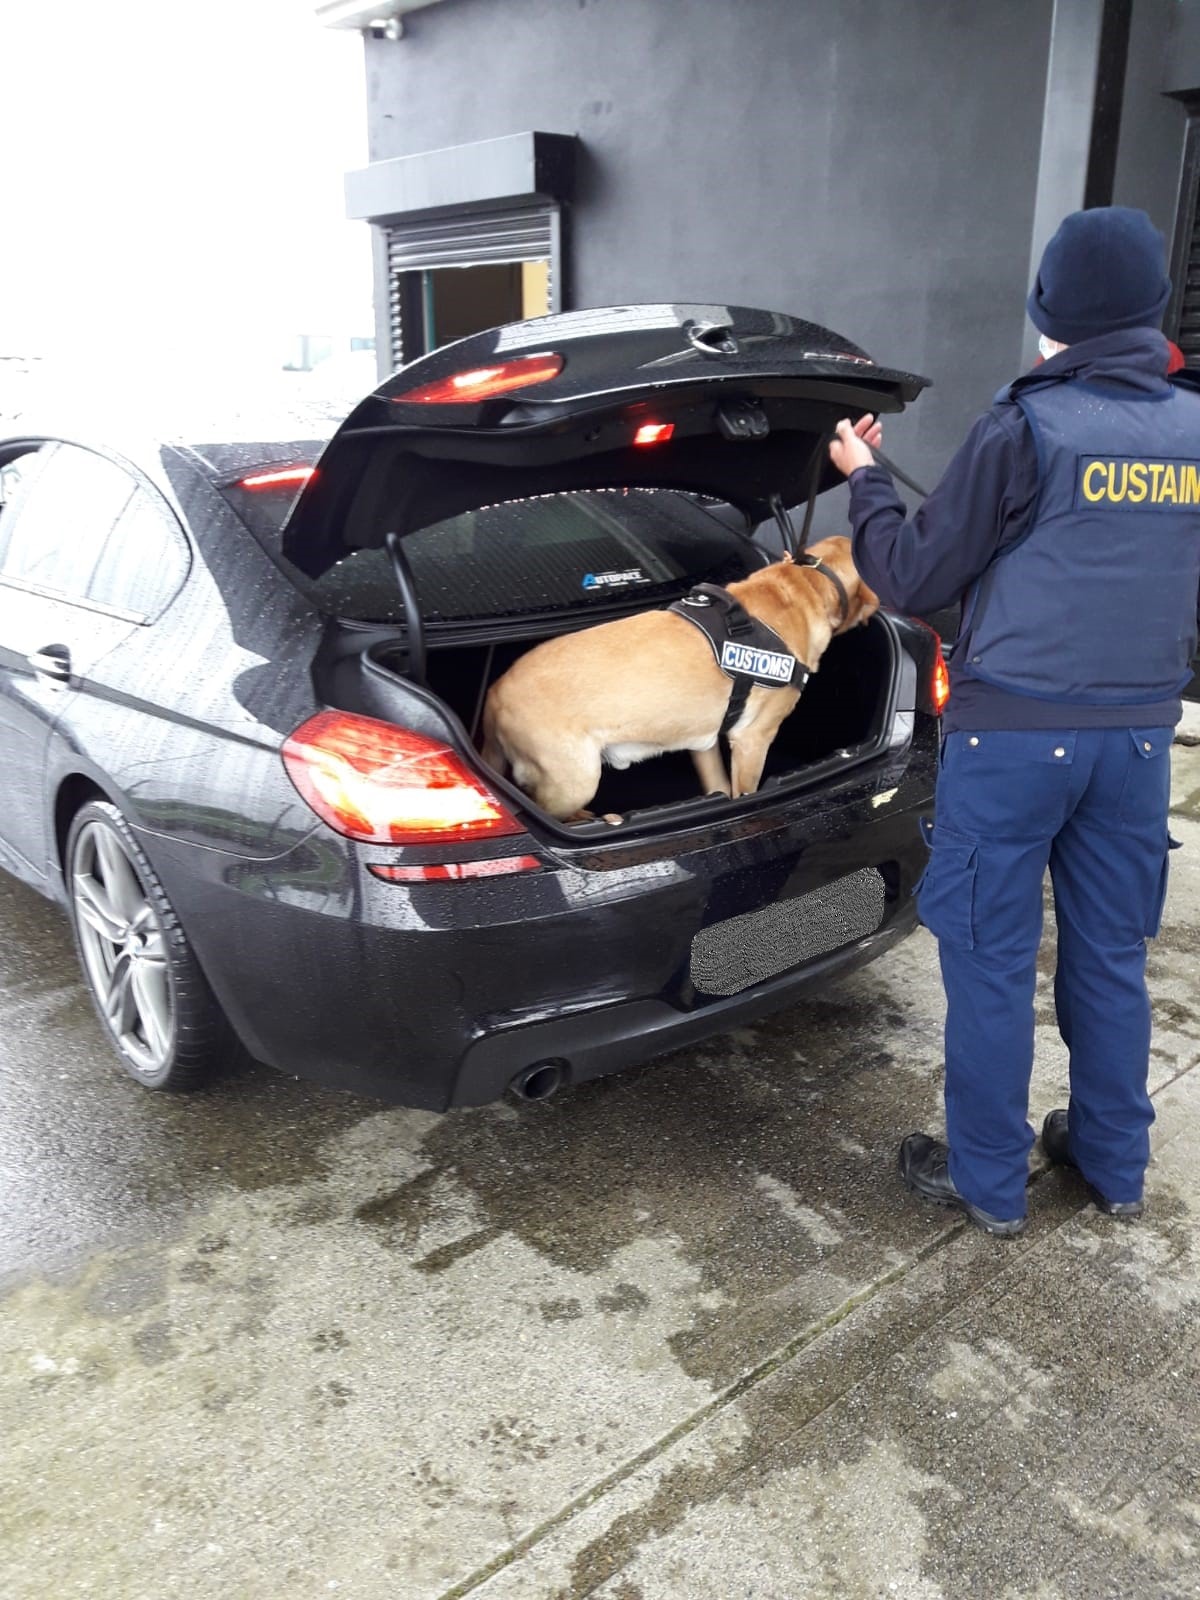 Cars seized by CAB during an operation in Tipperary.